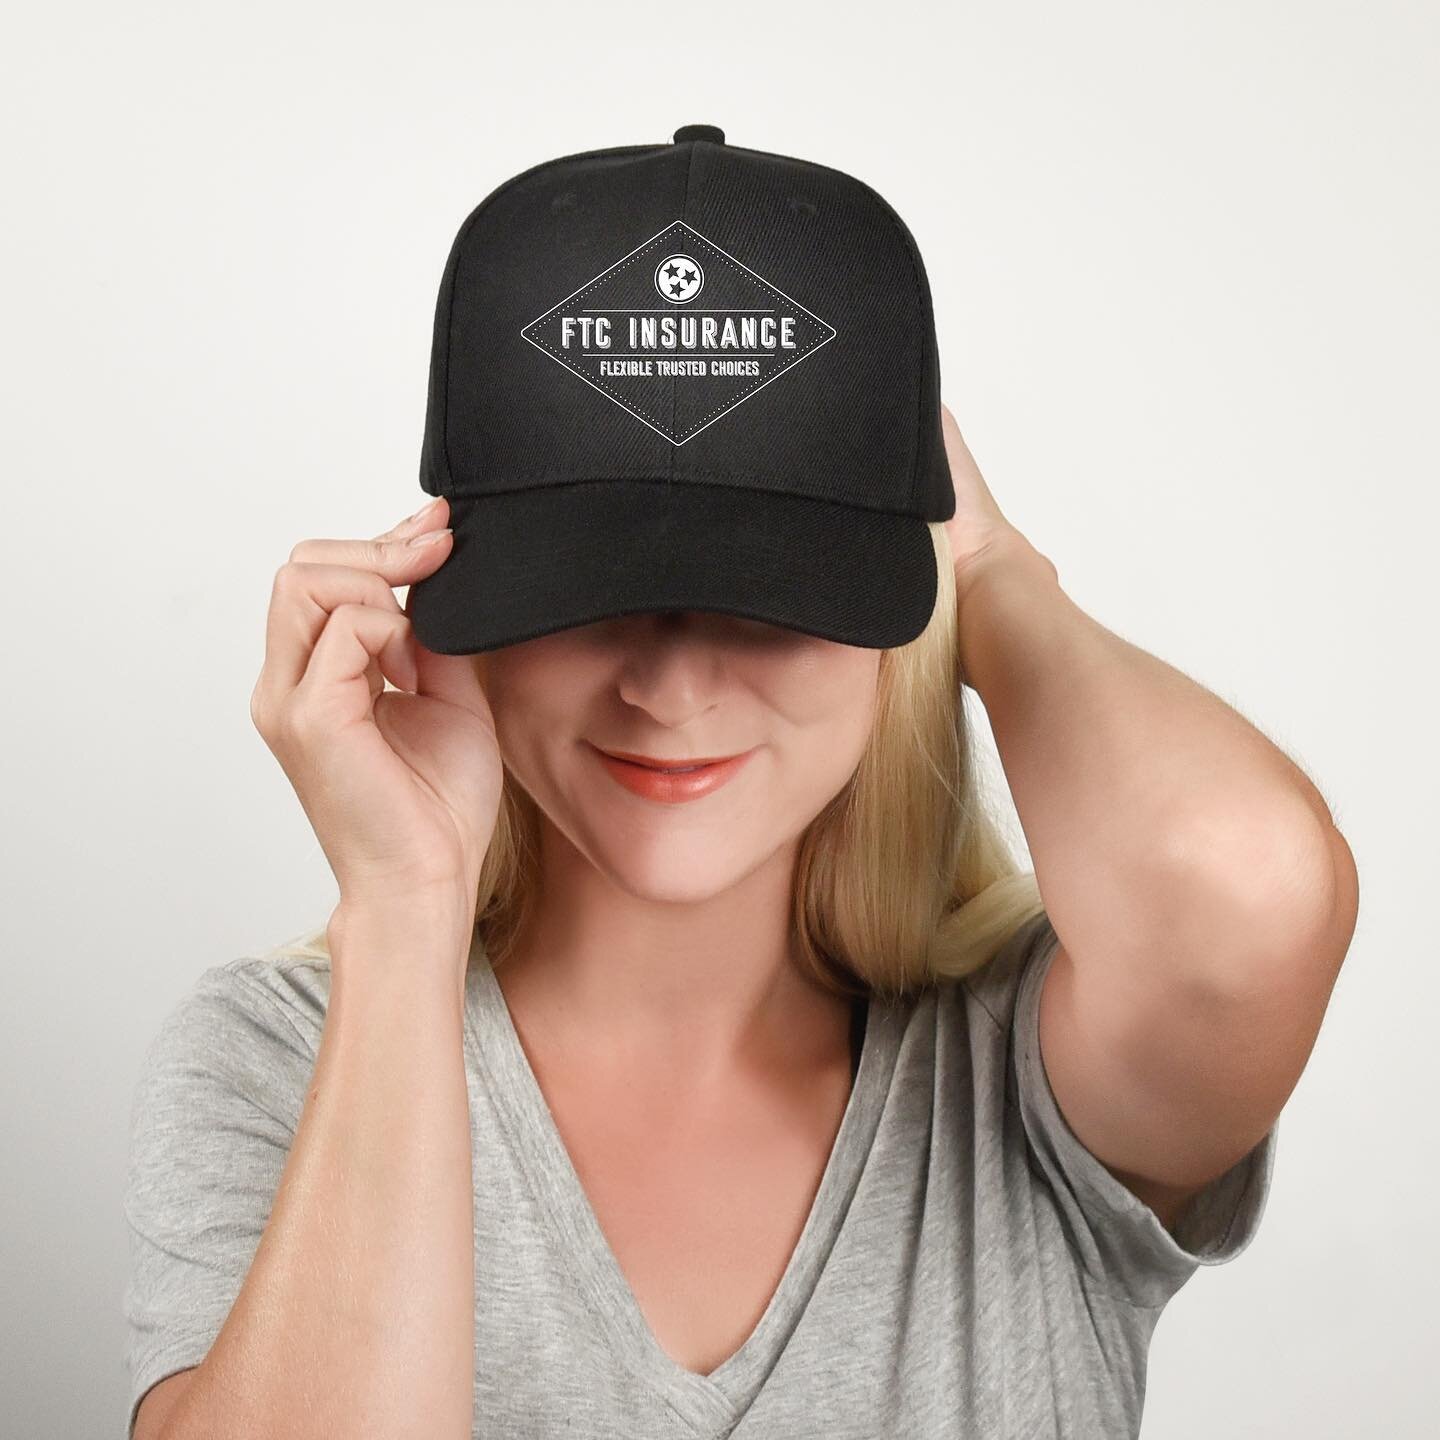 New branding for FTC Insurance. Who doesn&rsquo;t love a trucker hat? 
⭐️
⭐️
⭐️
#branding #logodesign #mockupdesign #ftcinsurance @ftcinsurance #brandidentity #brentwoodtn #wilcotn @mcvaycreative #mcvaycreative